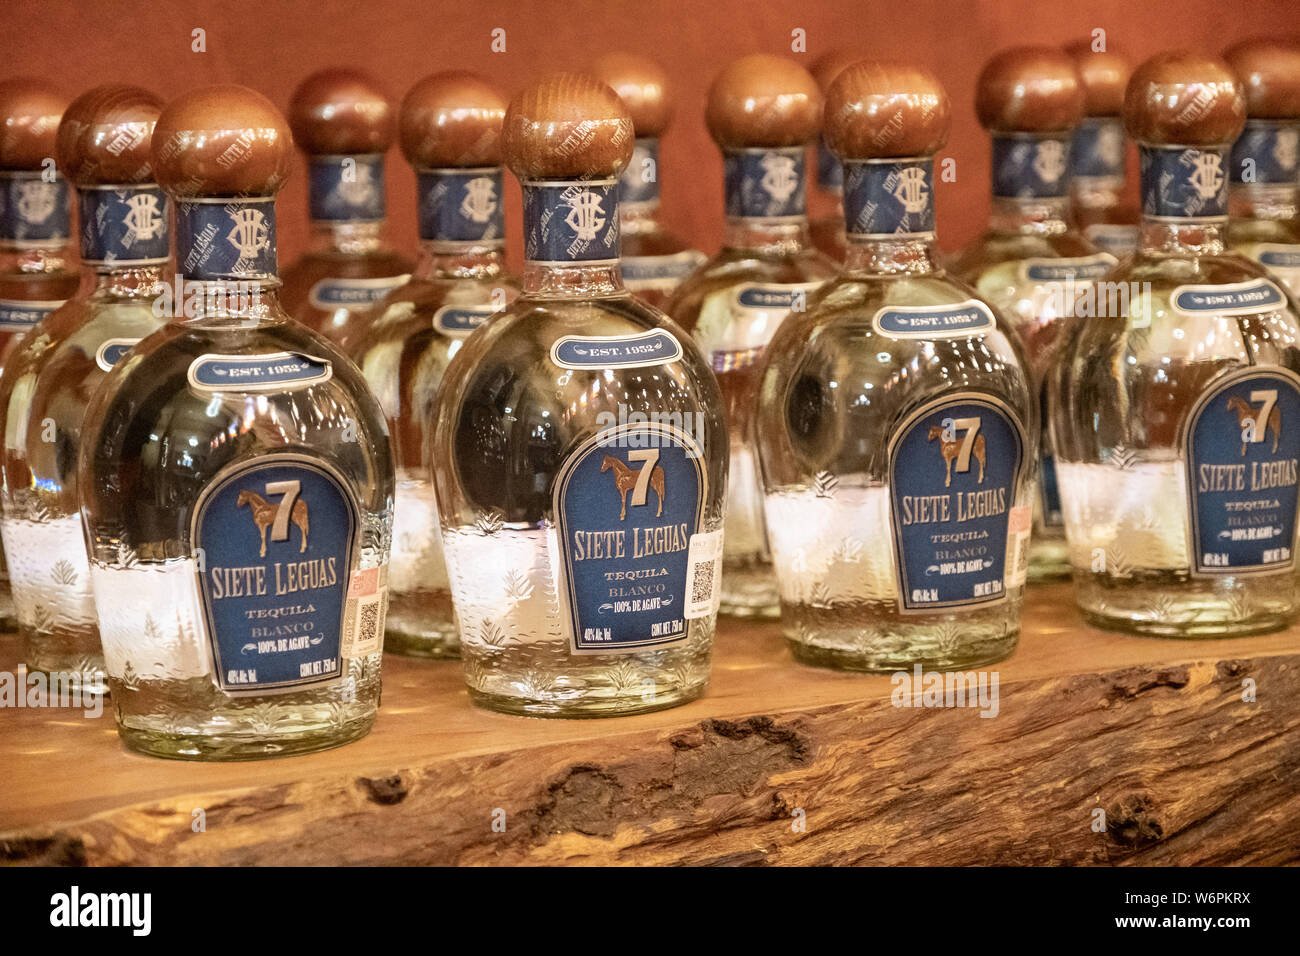 Bottles of white tequila in the tasting room inside the Casa Siete Leguas, El Centenario tequila distillery in Atotonilco de Alto, Jalisco, Mexico. The tequila is aged from 2-12 years in white oak barrels that once held American Kentucky Bourbon. The Seven Leagues tequila distillery is the oldest family owned distillery producing authentic handcrafted tequila using traditional methods. Stock Photo